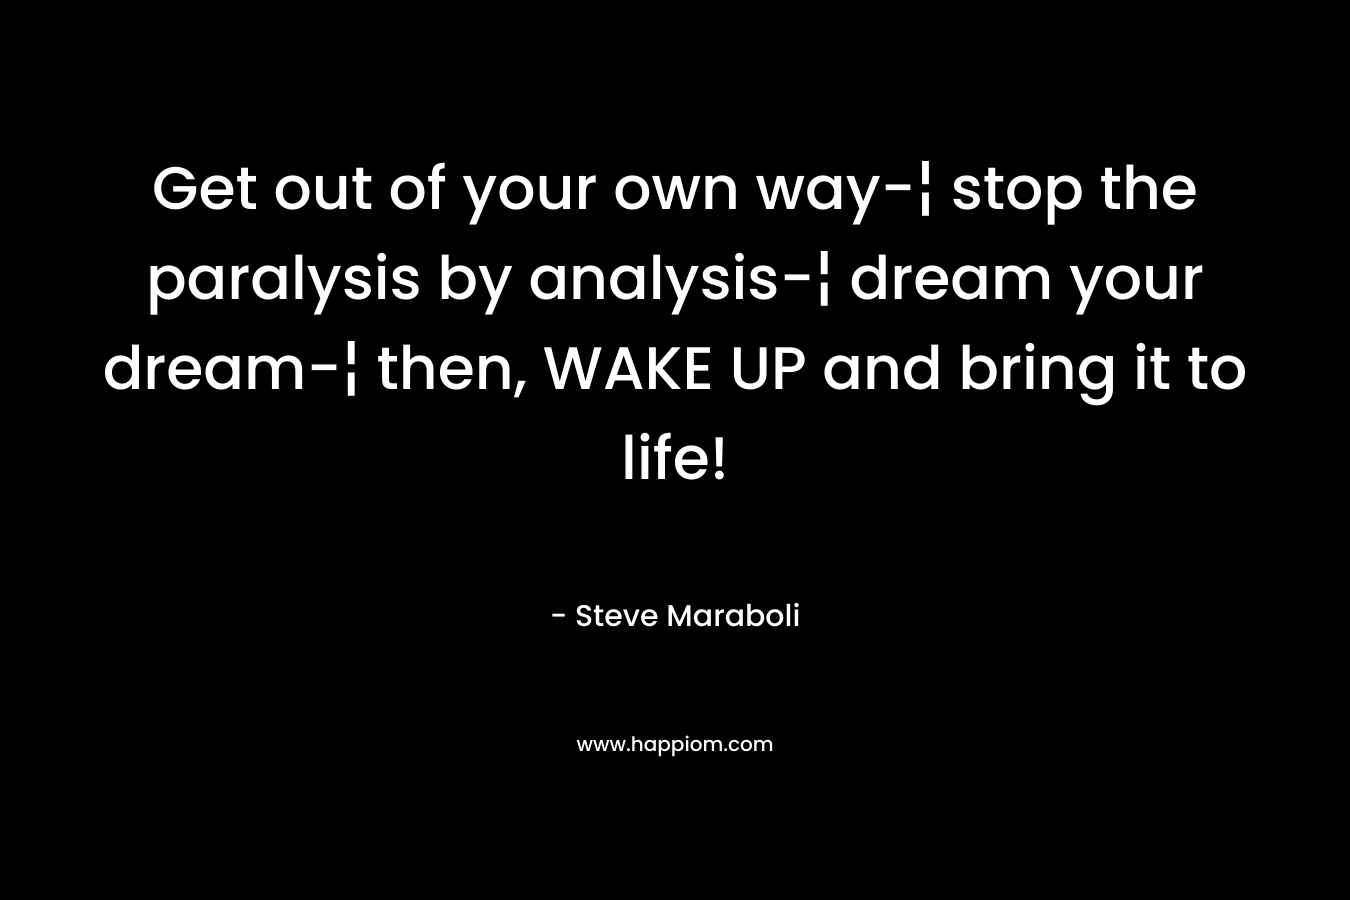 Get out of your own way-¦ stop the paralysis by analysis-¦ dream your dream-¦ then, WAKE UP and bring it to life! – Steve Maraboli